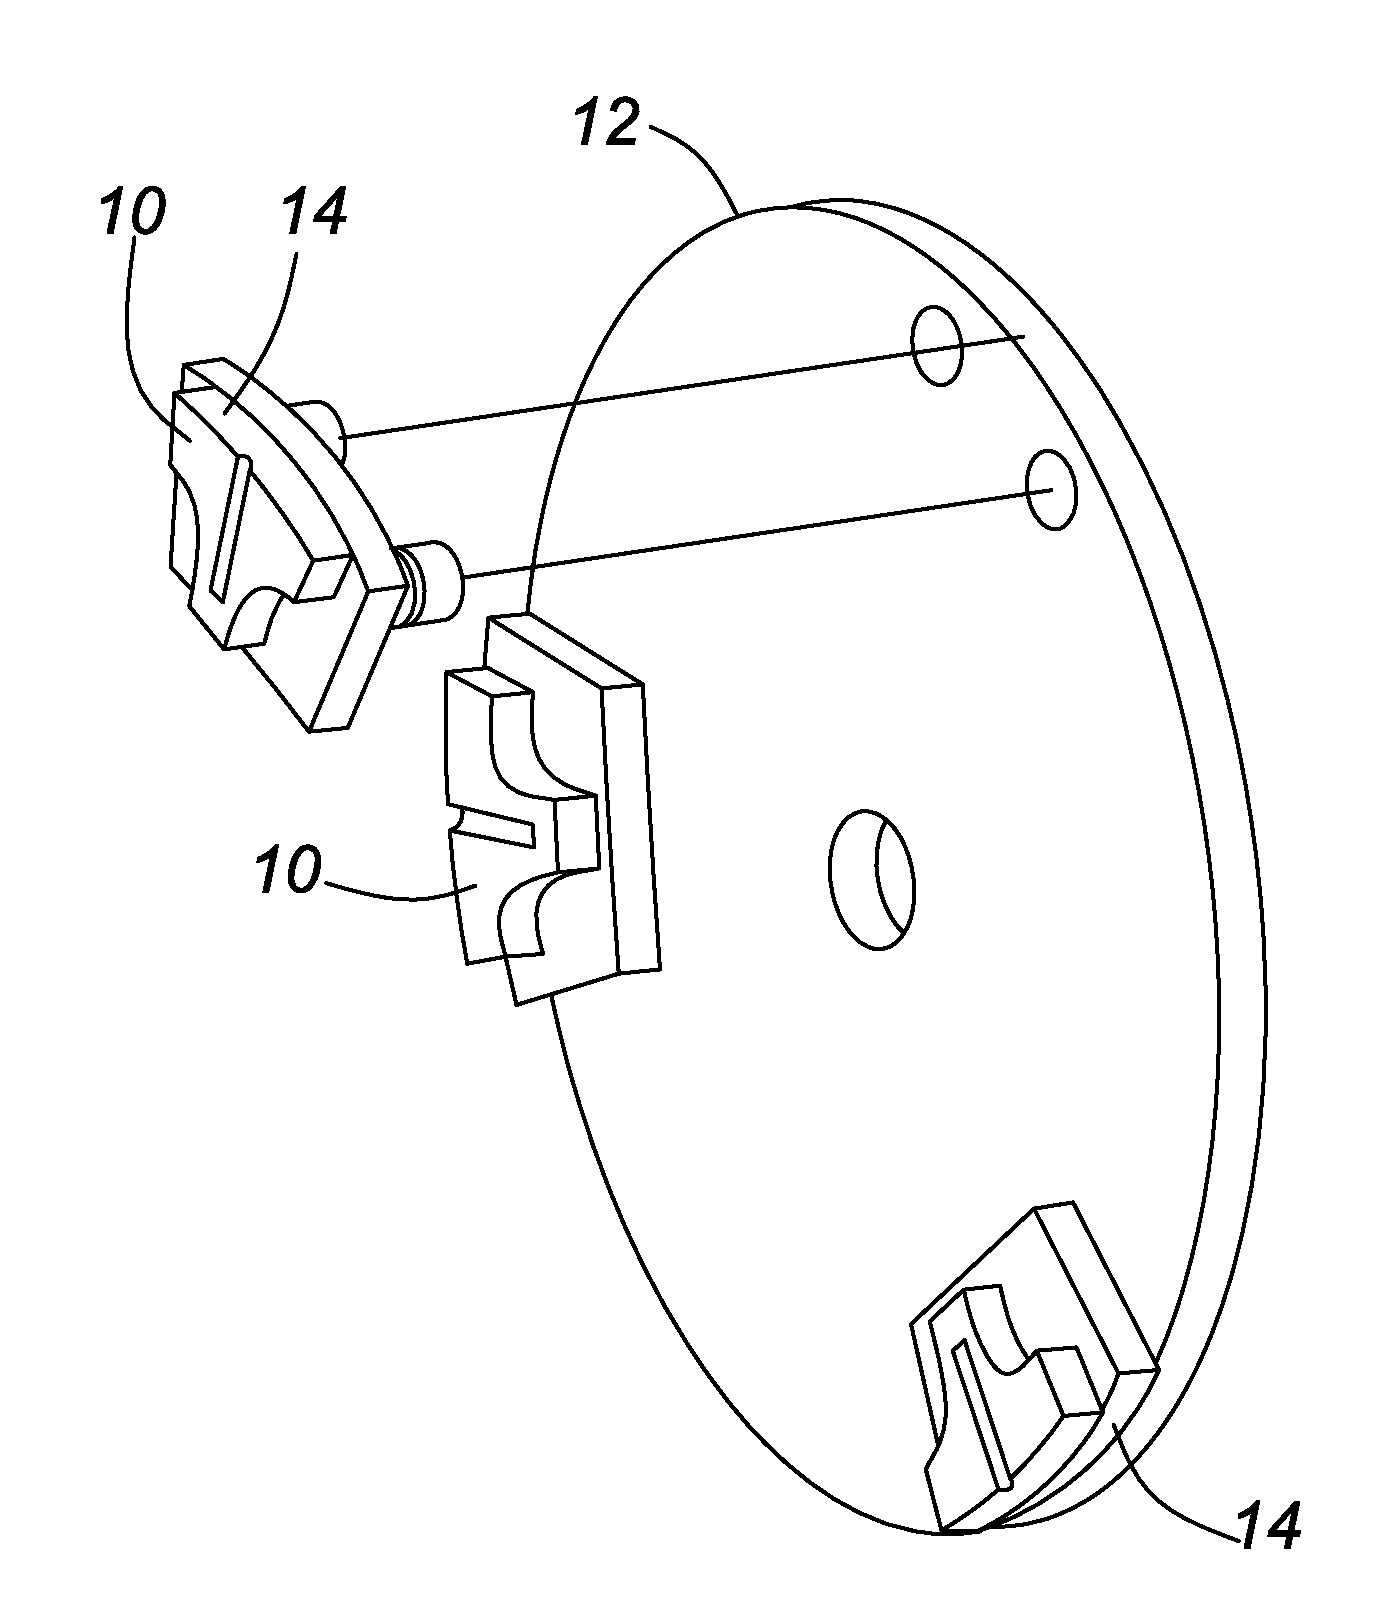 System for mounting an abrasive tool to a drive plate of grinding and polishing machines